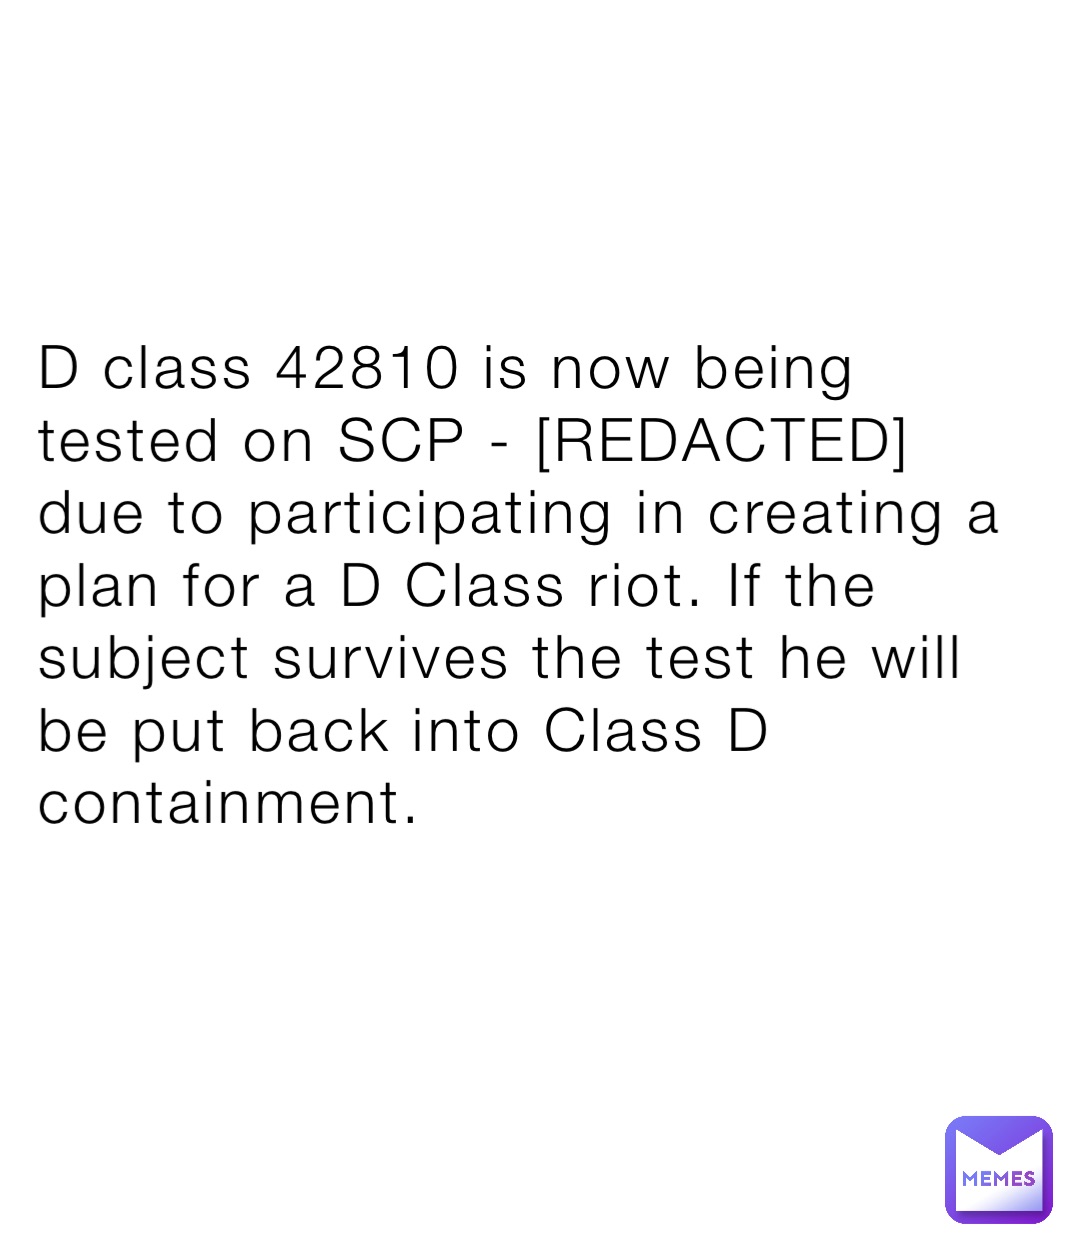 D class 42810 is now being tested on SCP - [REDACTED] due to participating in creating a plan for a D Class riot. If the subject survives the test he will be put back into Class D containment.